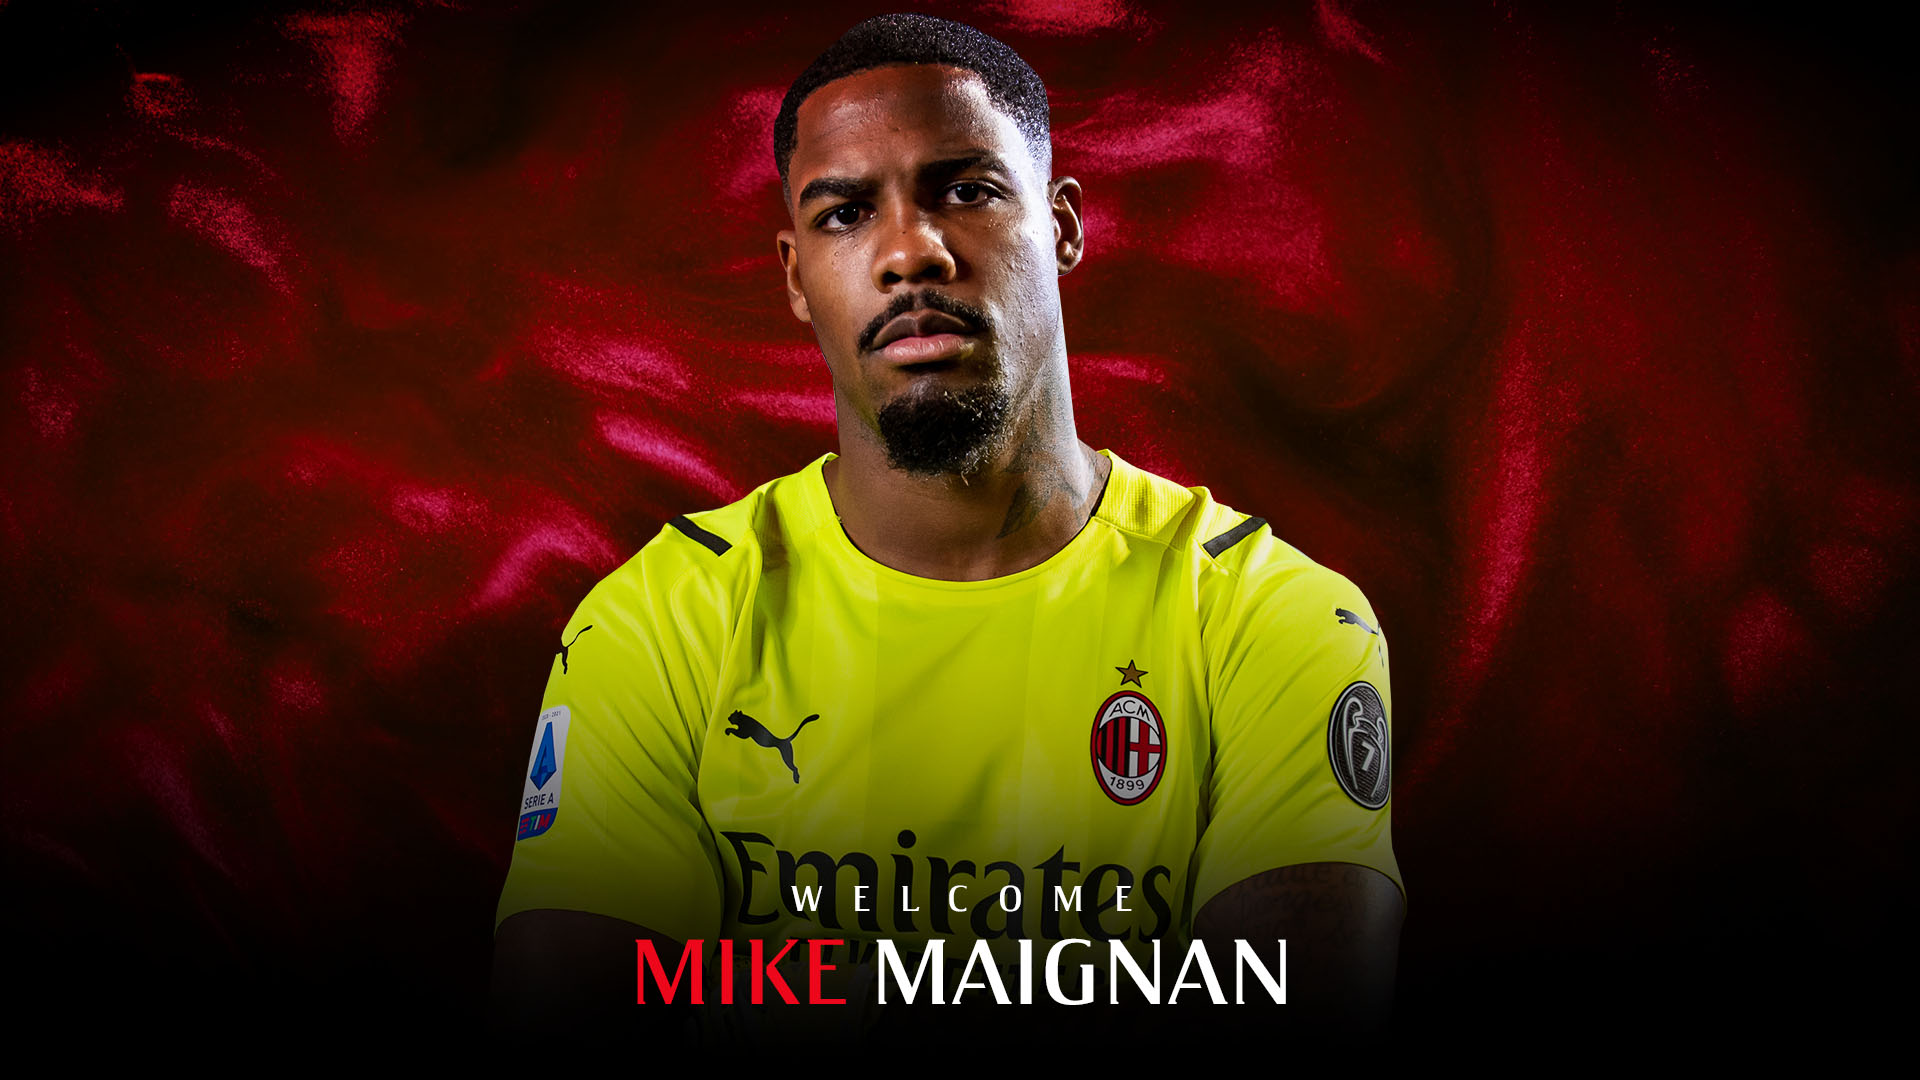 We analyzed the Milan latest signing Mike Maignan and discussed whether the Frenchman is good enough to fill Gianluigi Donnarumma’s gloves